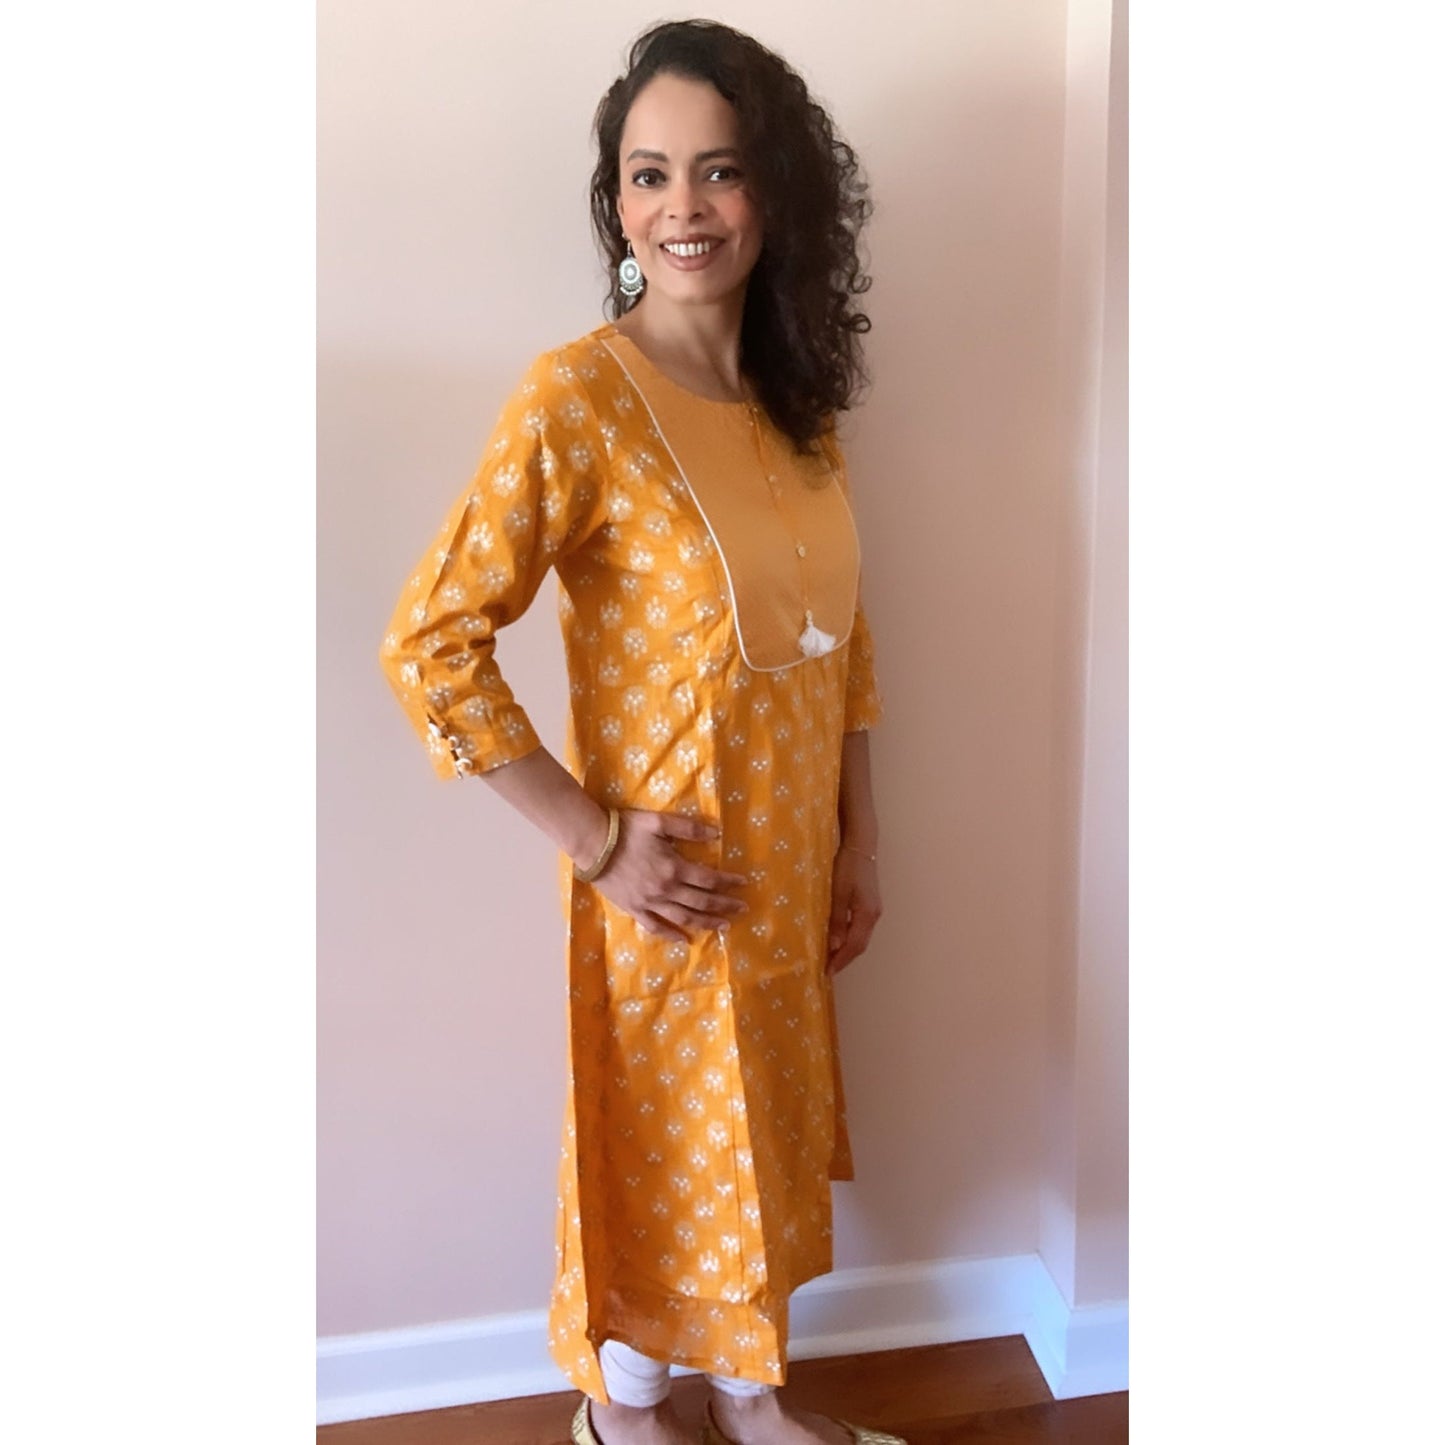 Sunshine yellow with white prints and a beautiful neckline. Comfortable Cotton Kurta for everyday wear.  